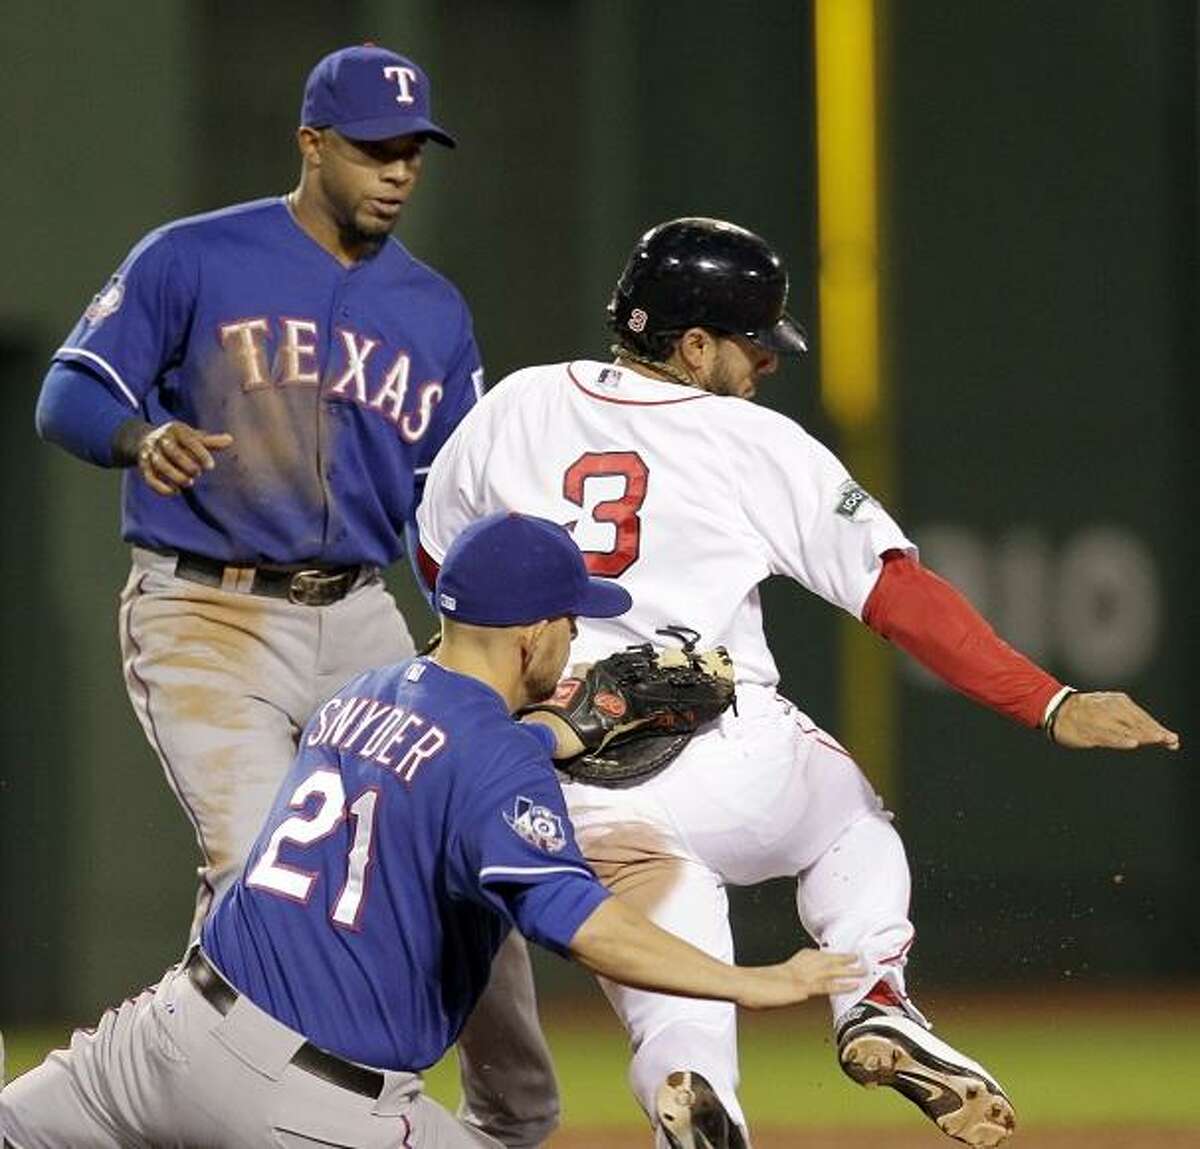 RED SOX: Mike Napoli drives in four as Rangers win, 6-3